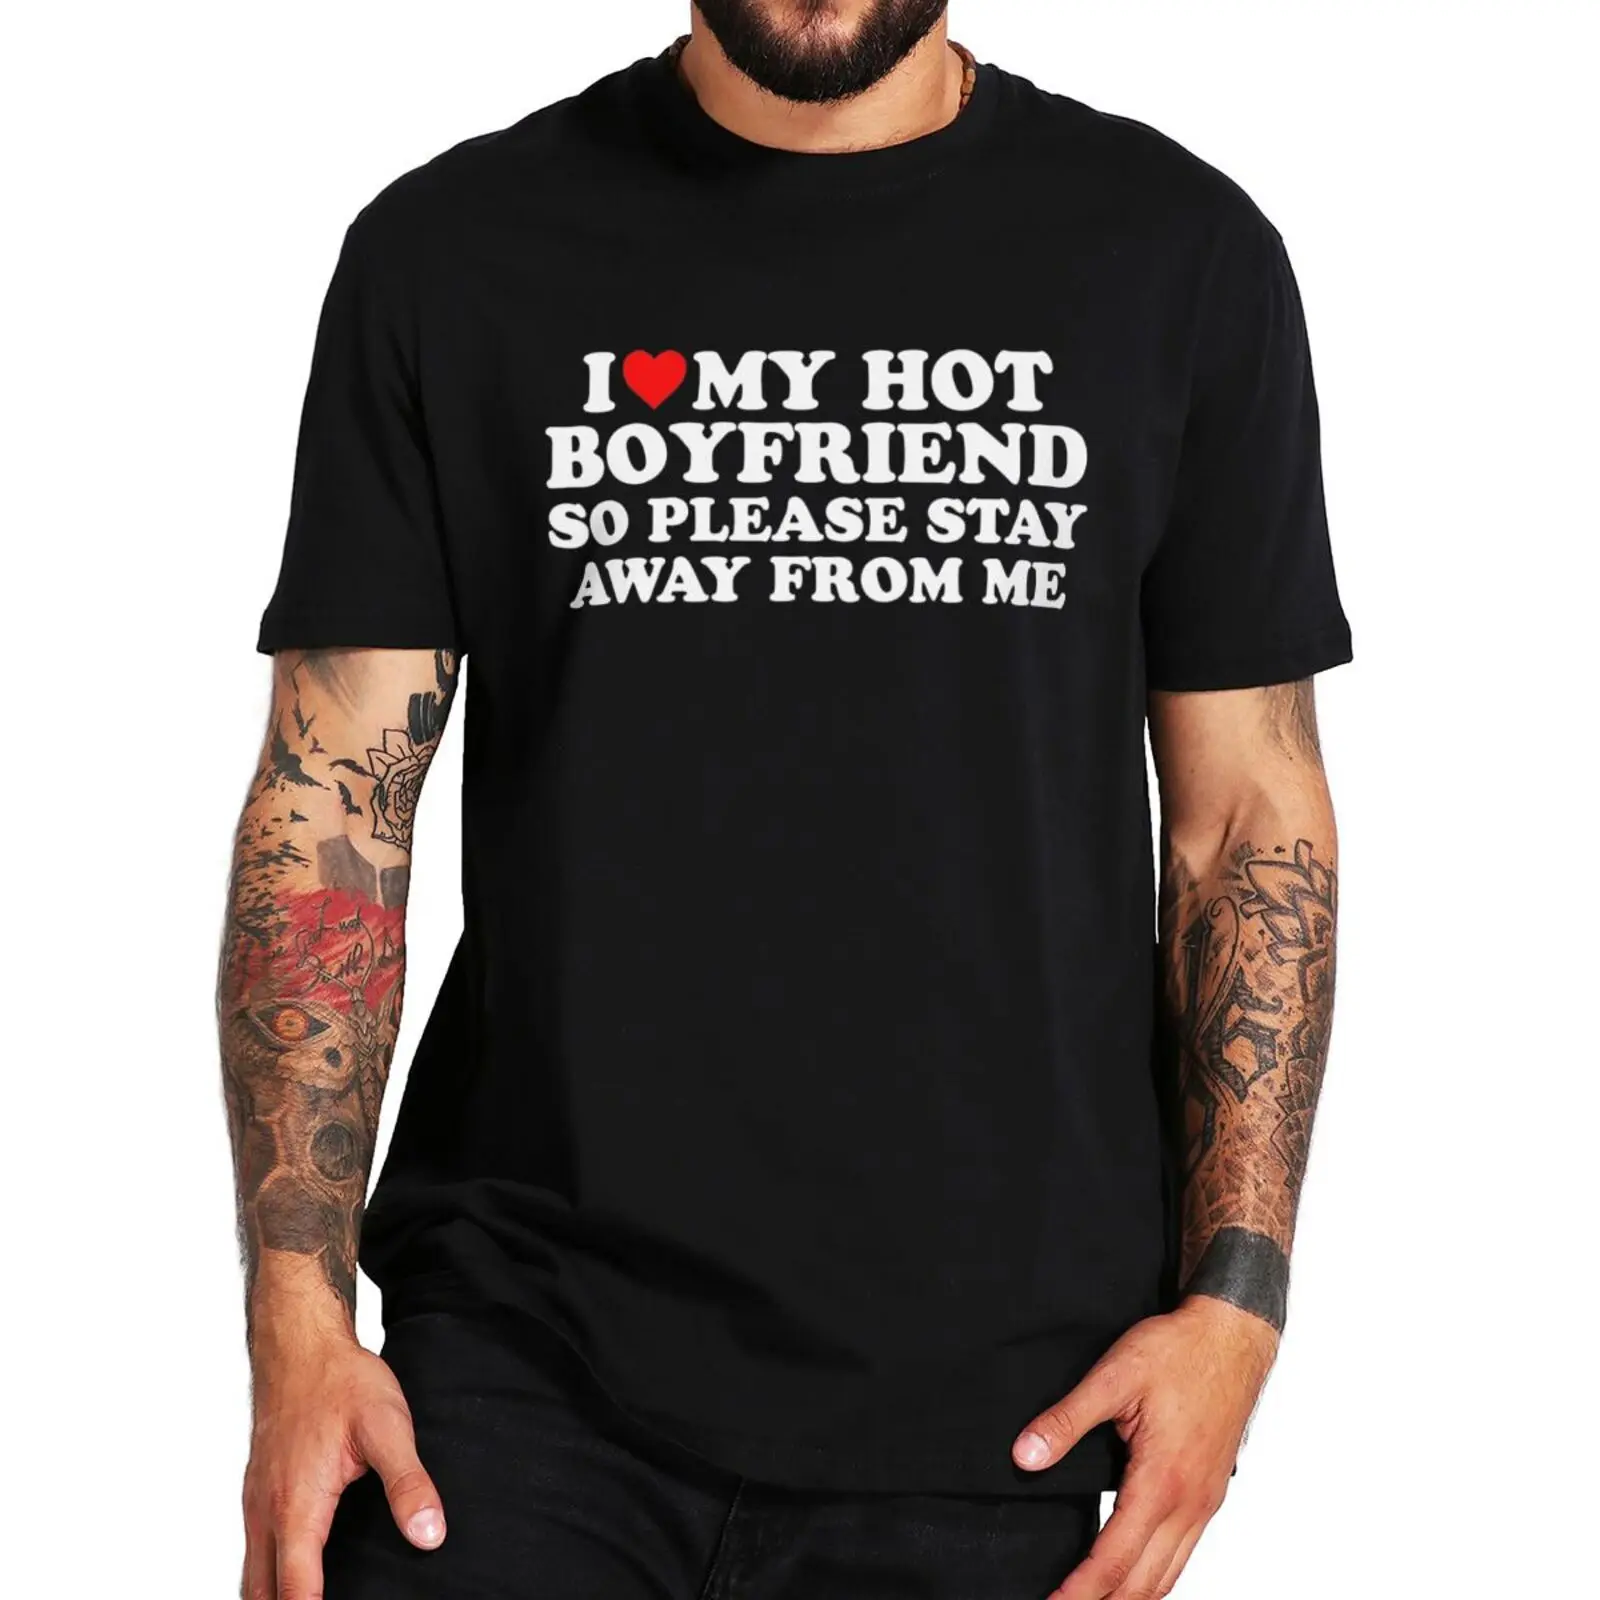 

I Love My Hot Boyfriend So Stay Away From Me T Shirt Funnny Humor Couples Tops Summer 100% Cotton Unisex Casual T-shirts EU Size